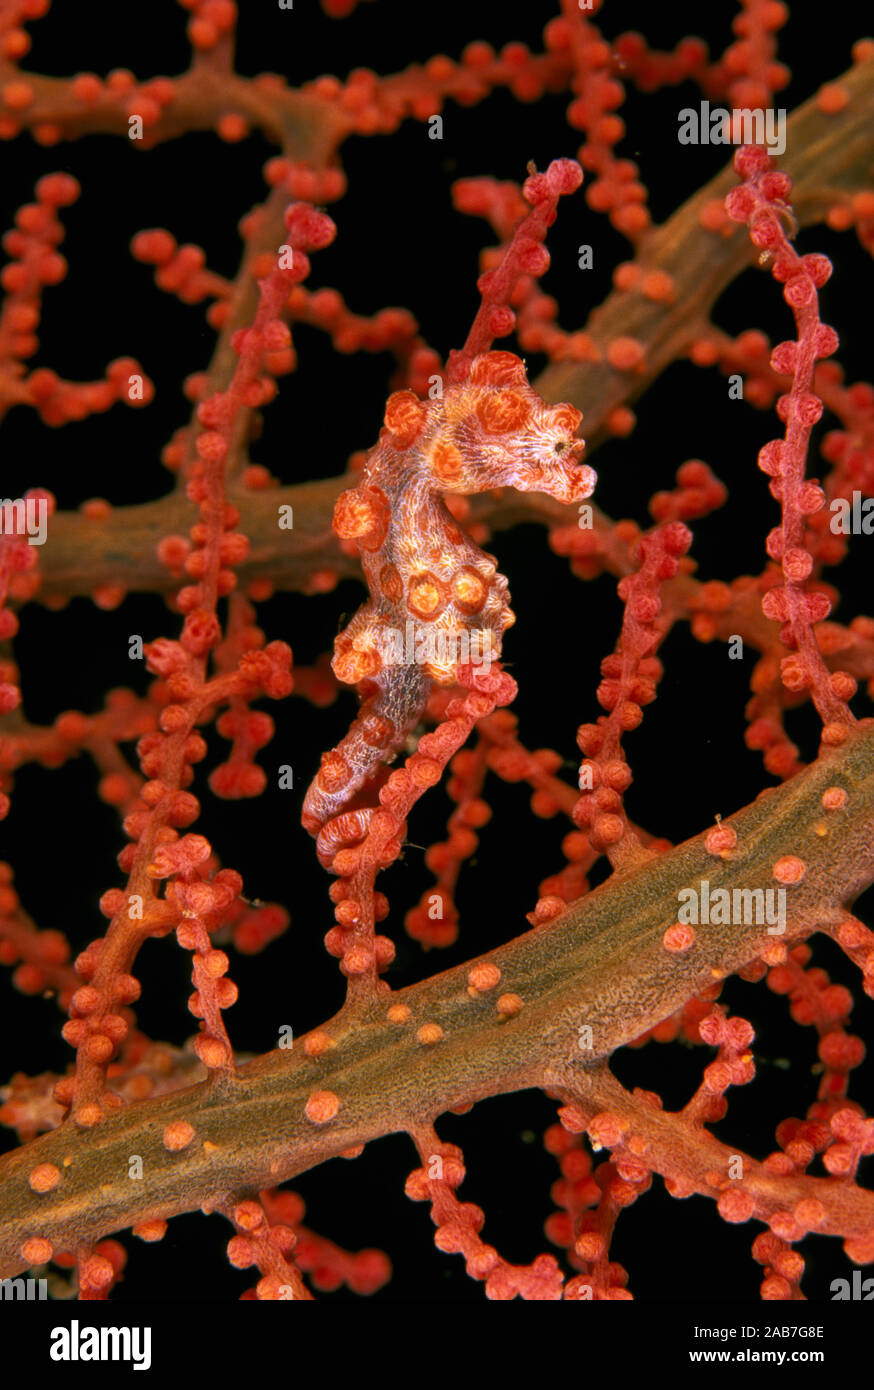 Pygmy seahorse (Hippocampus bargibanti), max 2 cms; only known to occur on Gorgonian coral Muricella spp. Northern Great Barrier Reef, Queensland, Aus Stock Photo